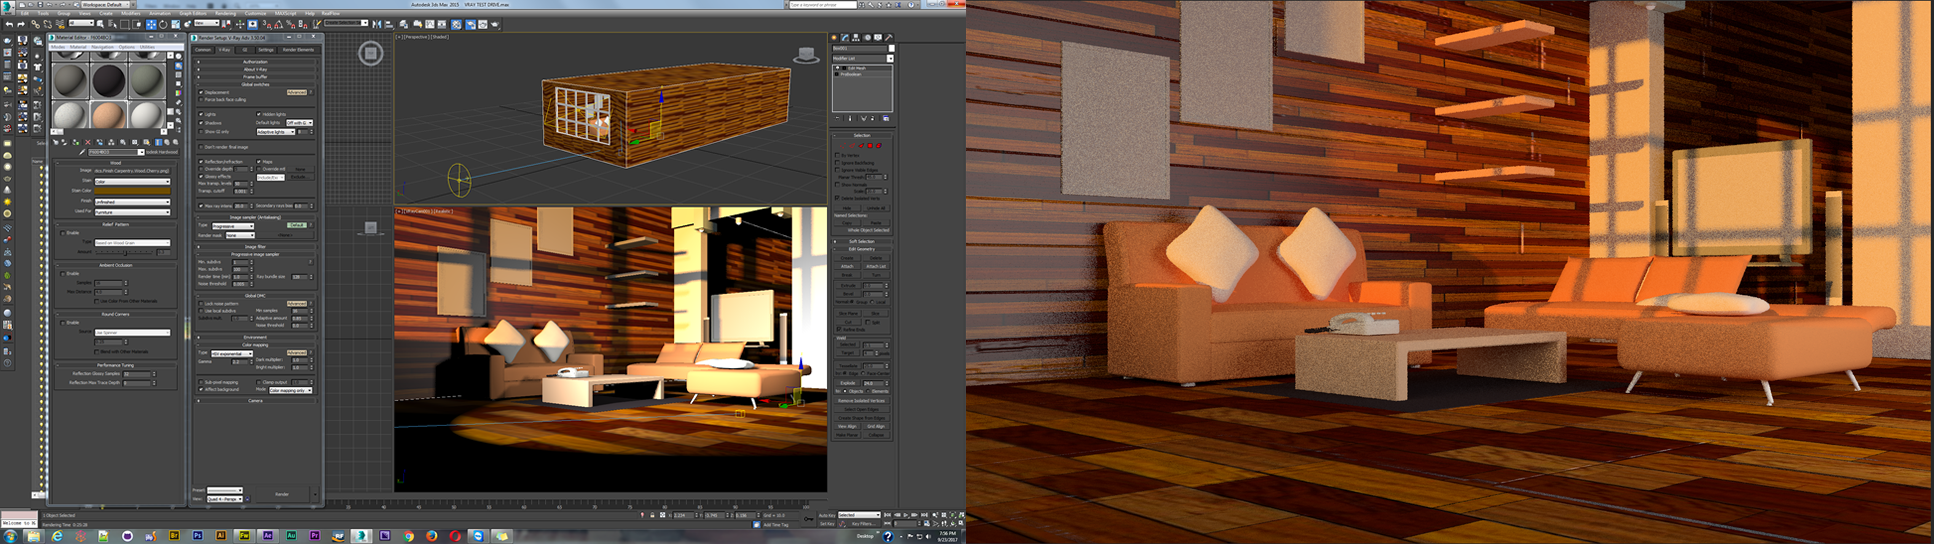 Too much noise in my vray render , it took 22minutes - Autodesk Community - 3ds Max